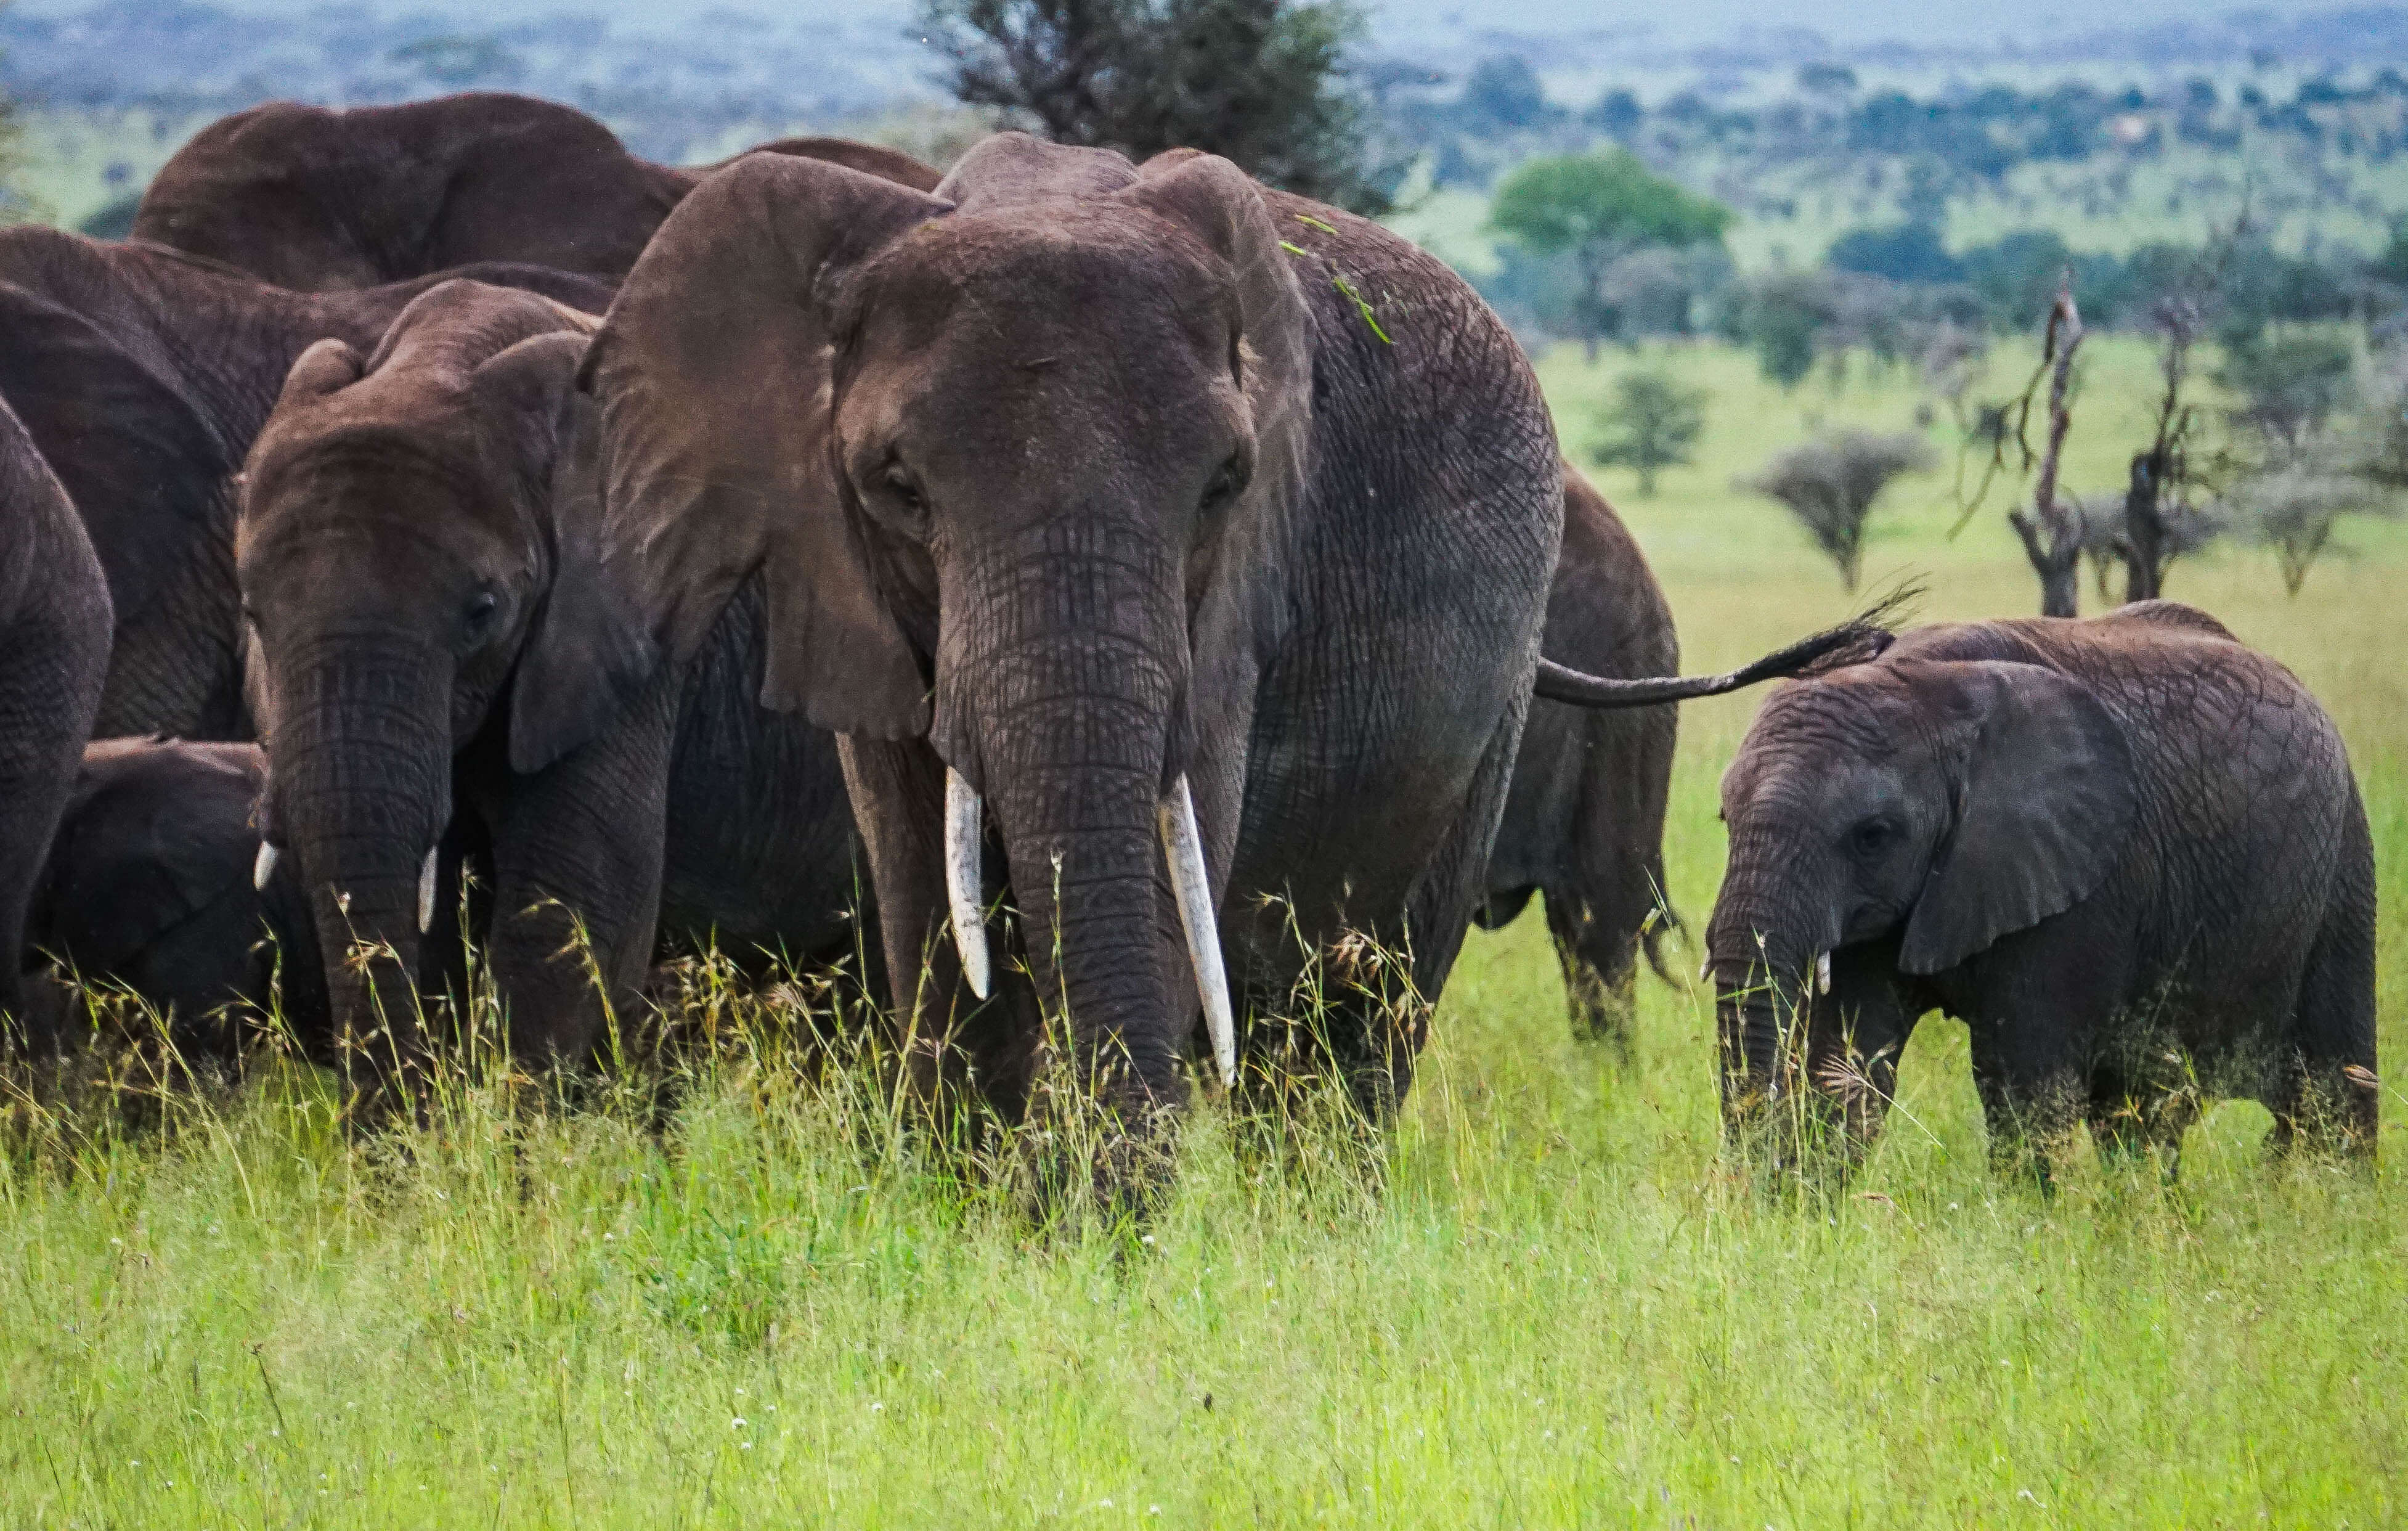 The Best Places to Safari in Africa - Elephants in Tanzania Serengeti